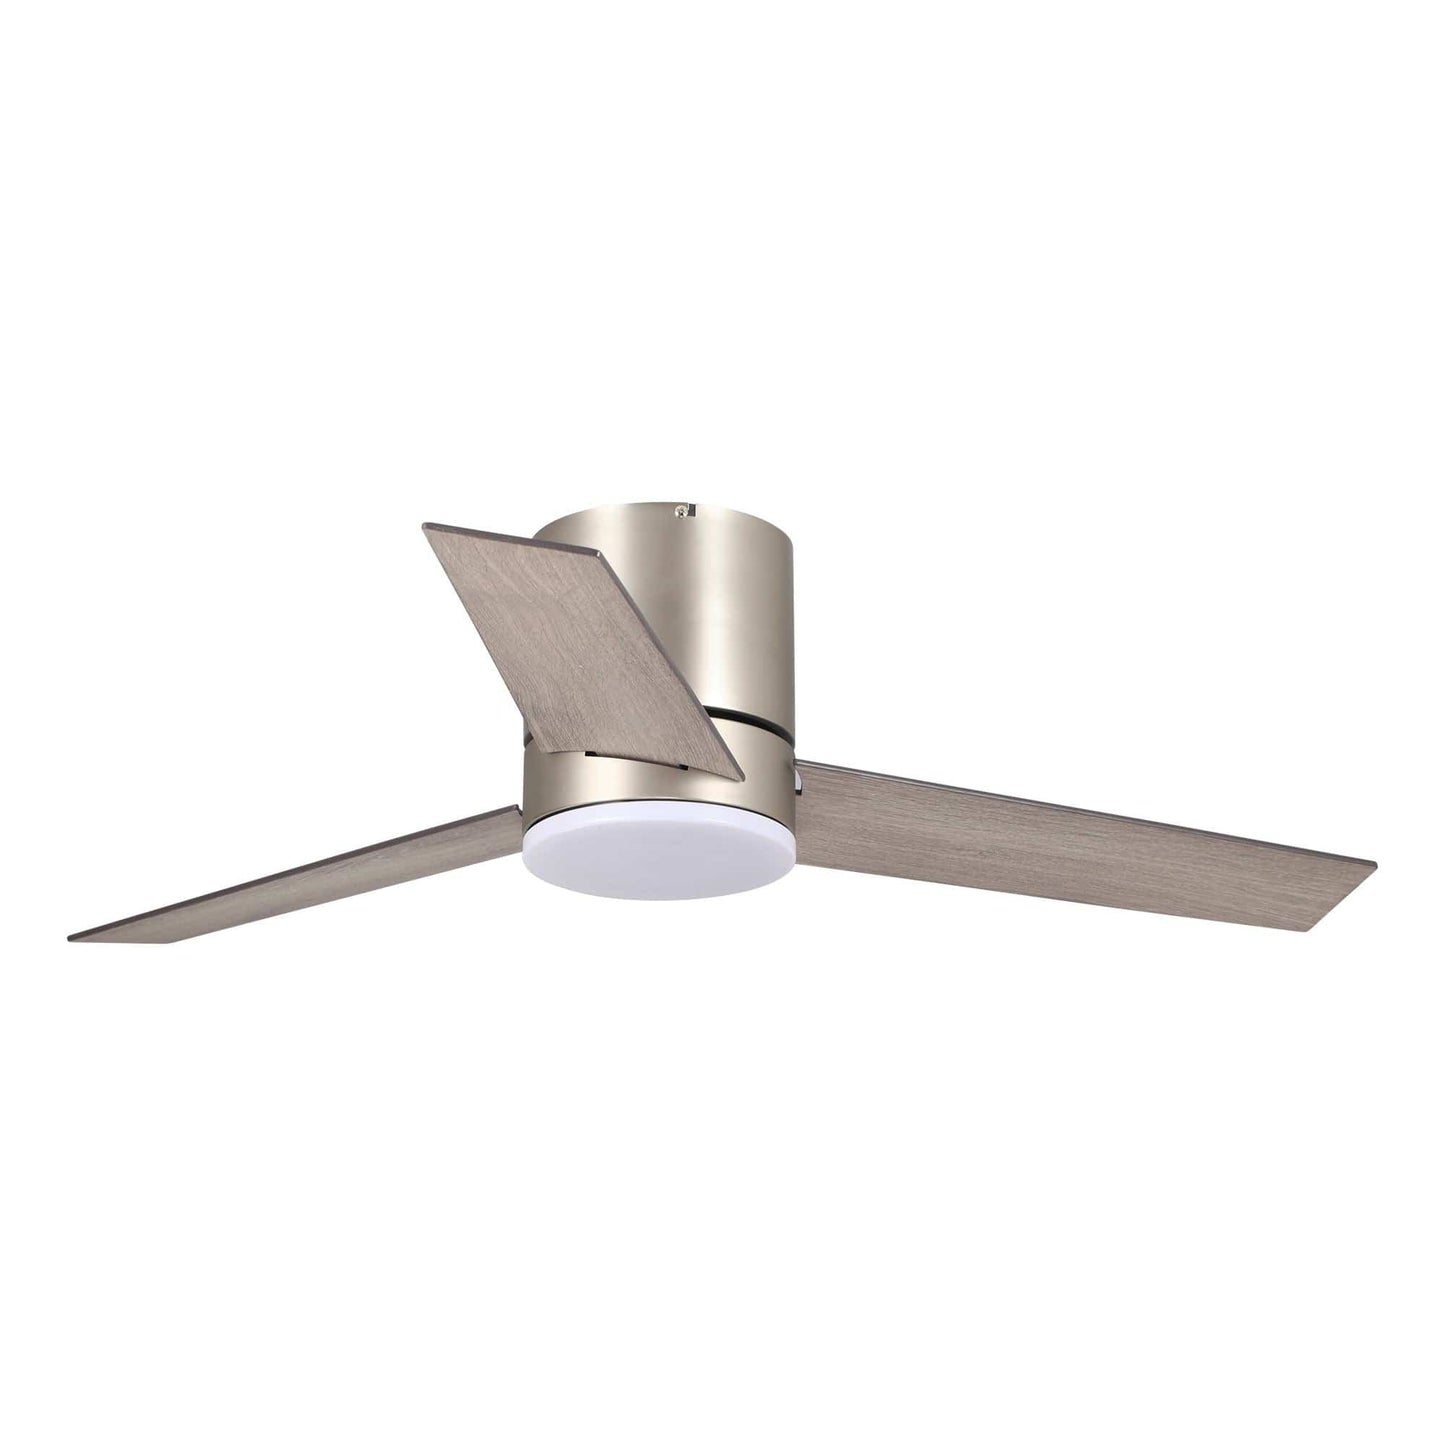 Parrot Uncle 48" Modern Satin Nickel Flush Mount Reversible Ceiling Fan with Lighting and Remote Control